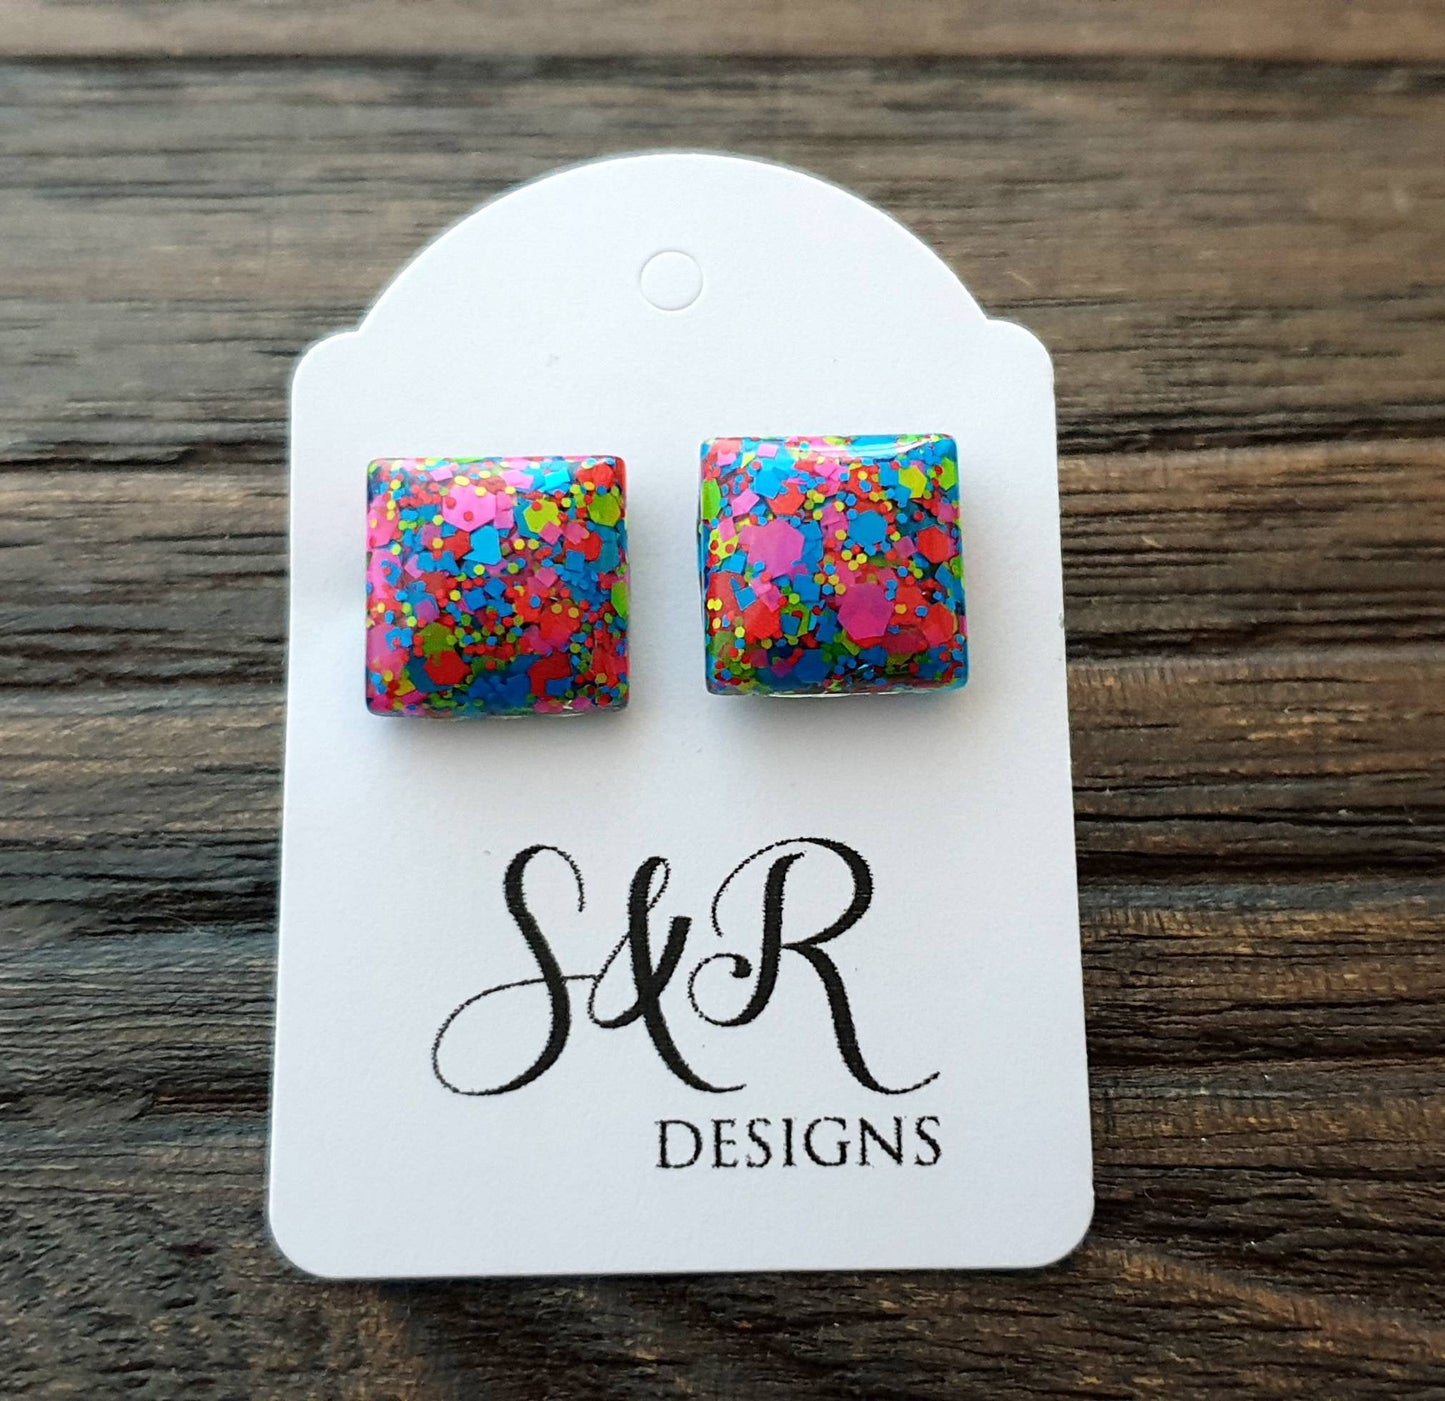 Square Resin Stud Earrings, Neon Glitter Square Earrings made with Stainless Steel. 12mm